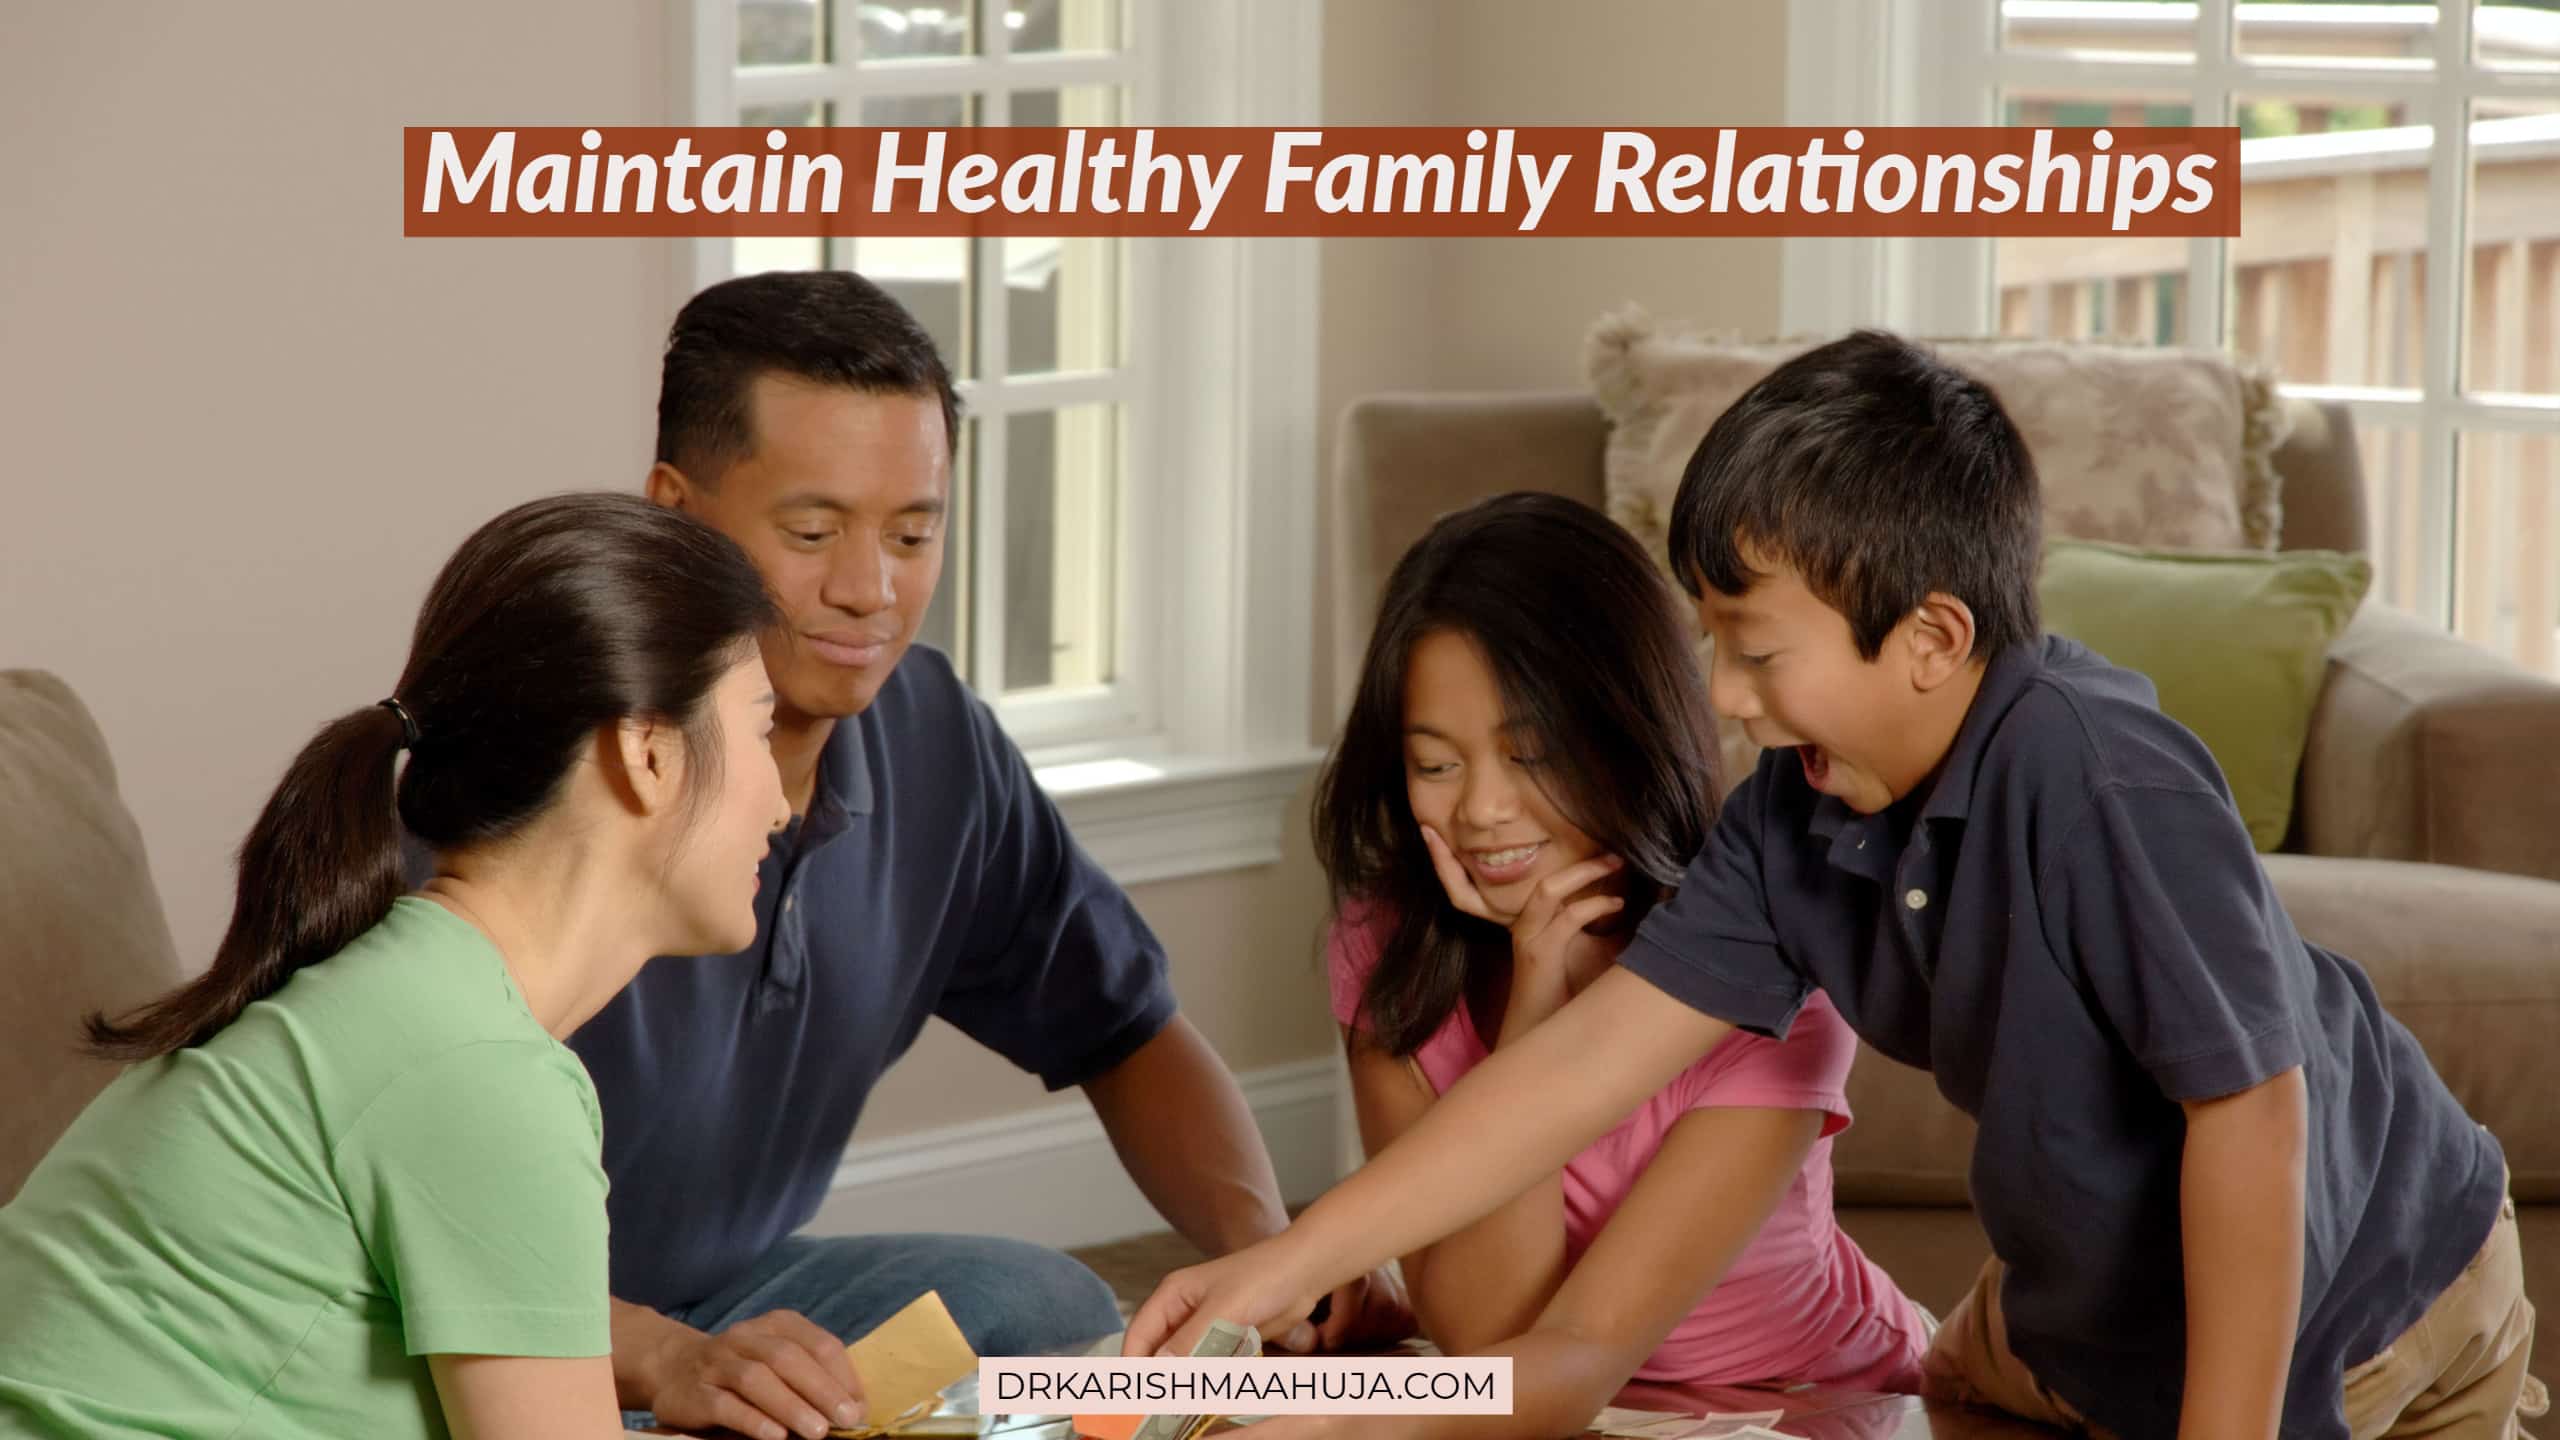 Maintain healthy family relationships in the Pandemic